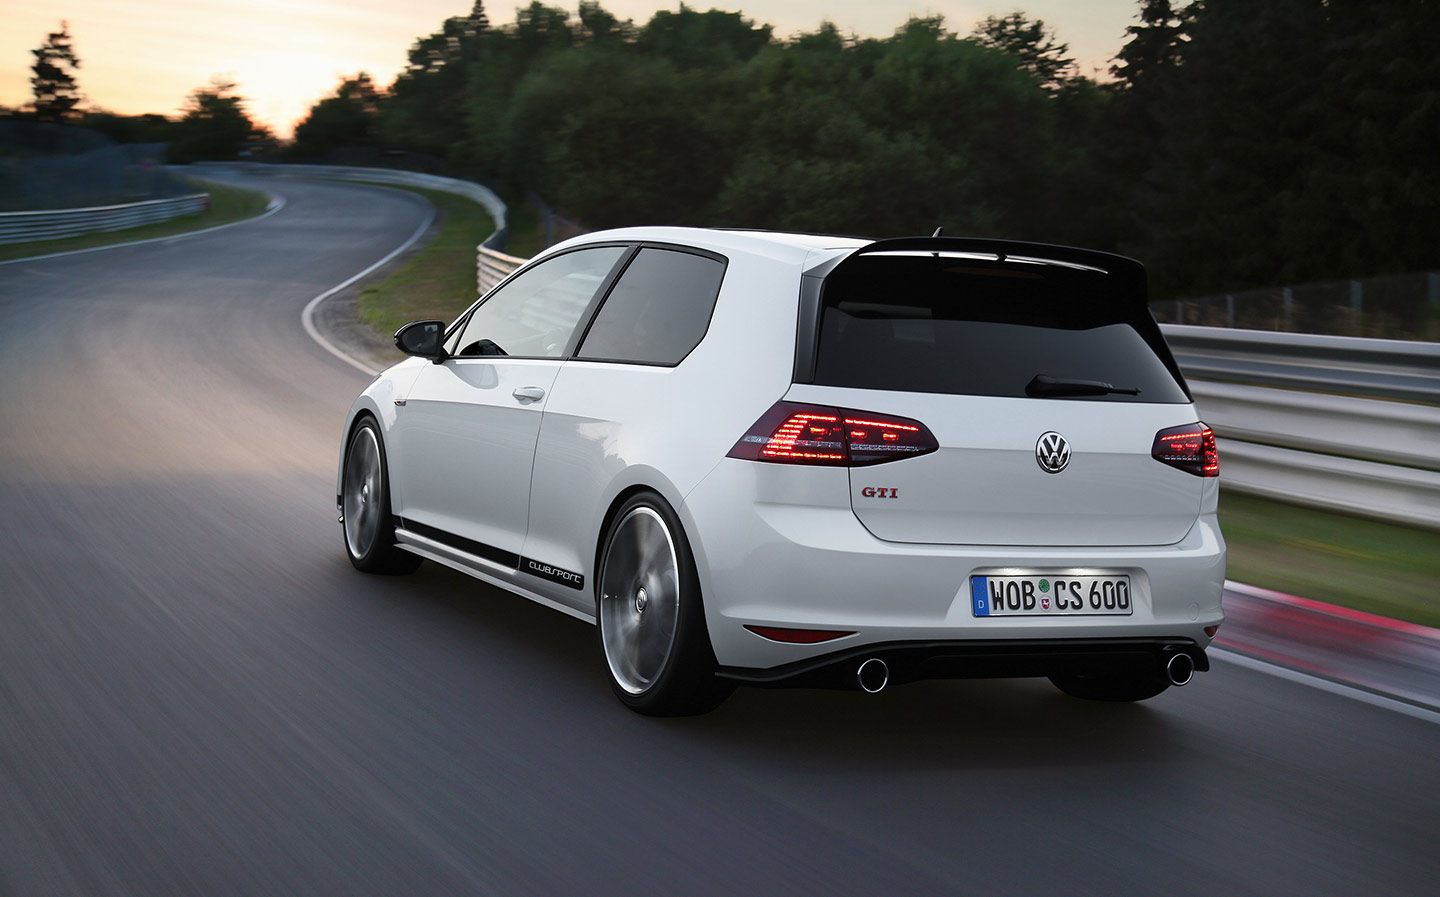 The Clarkson Review: 2016 Volkswagen Golf GTI Clubsport Edition 40